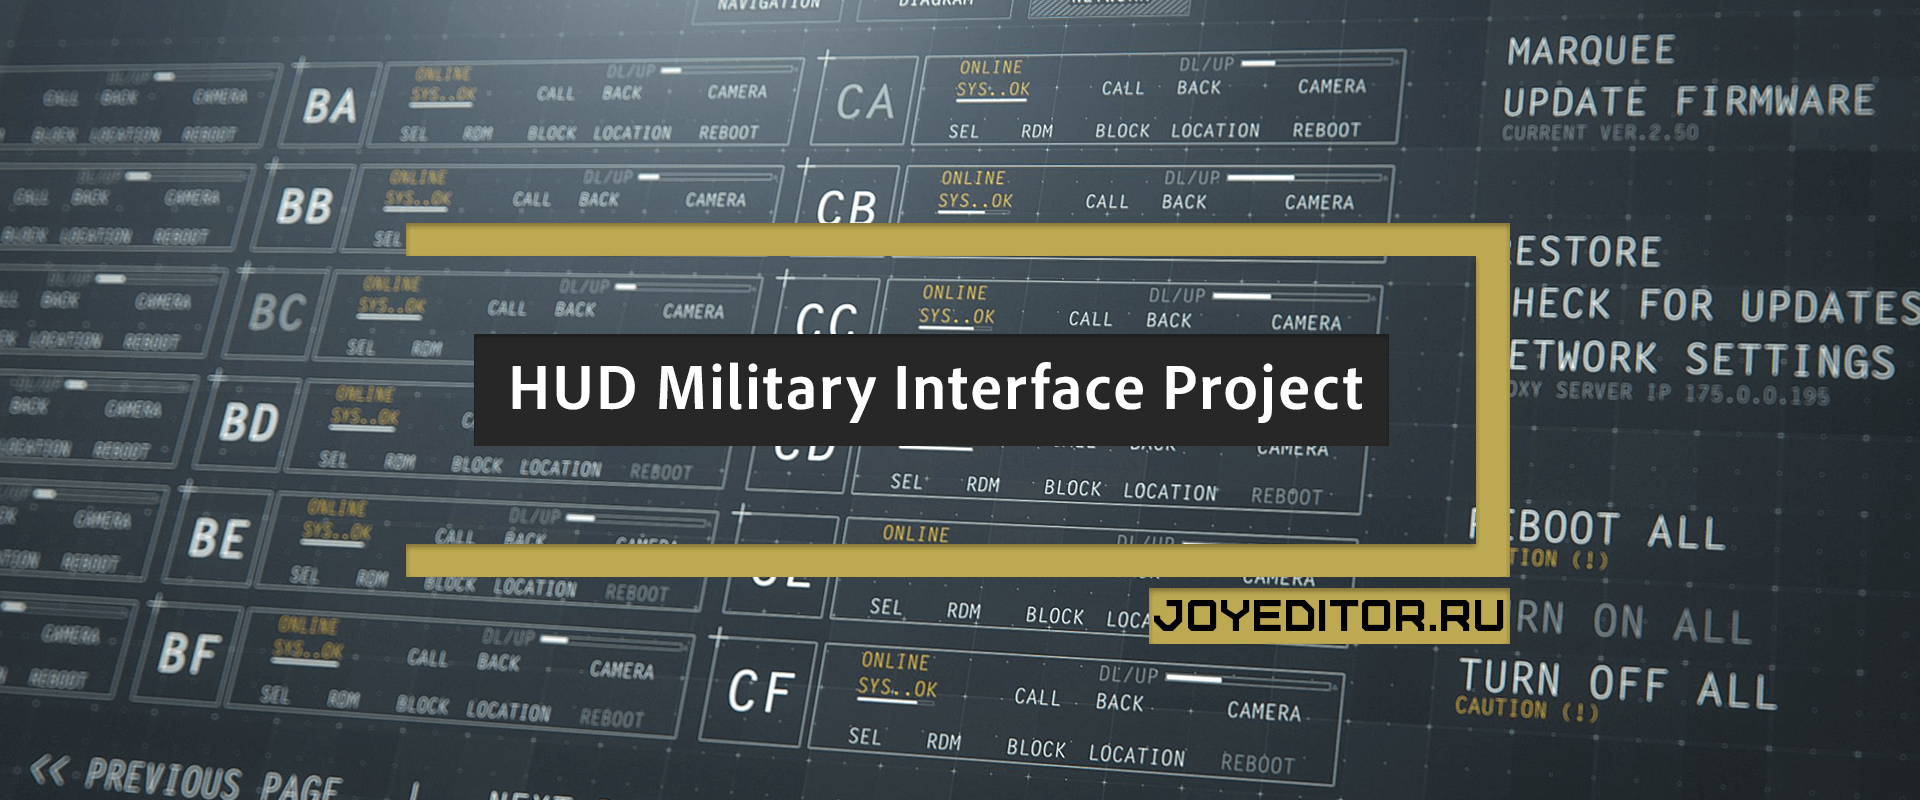 HUD Military Interface Project